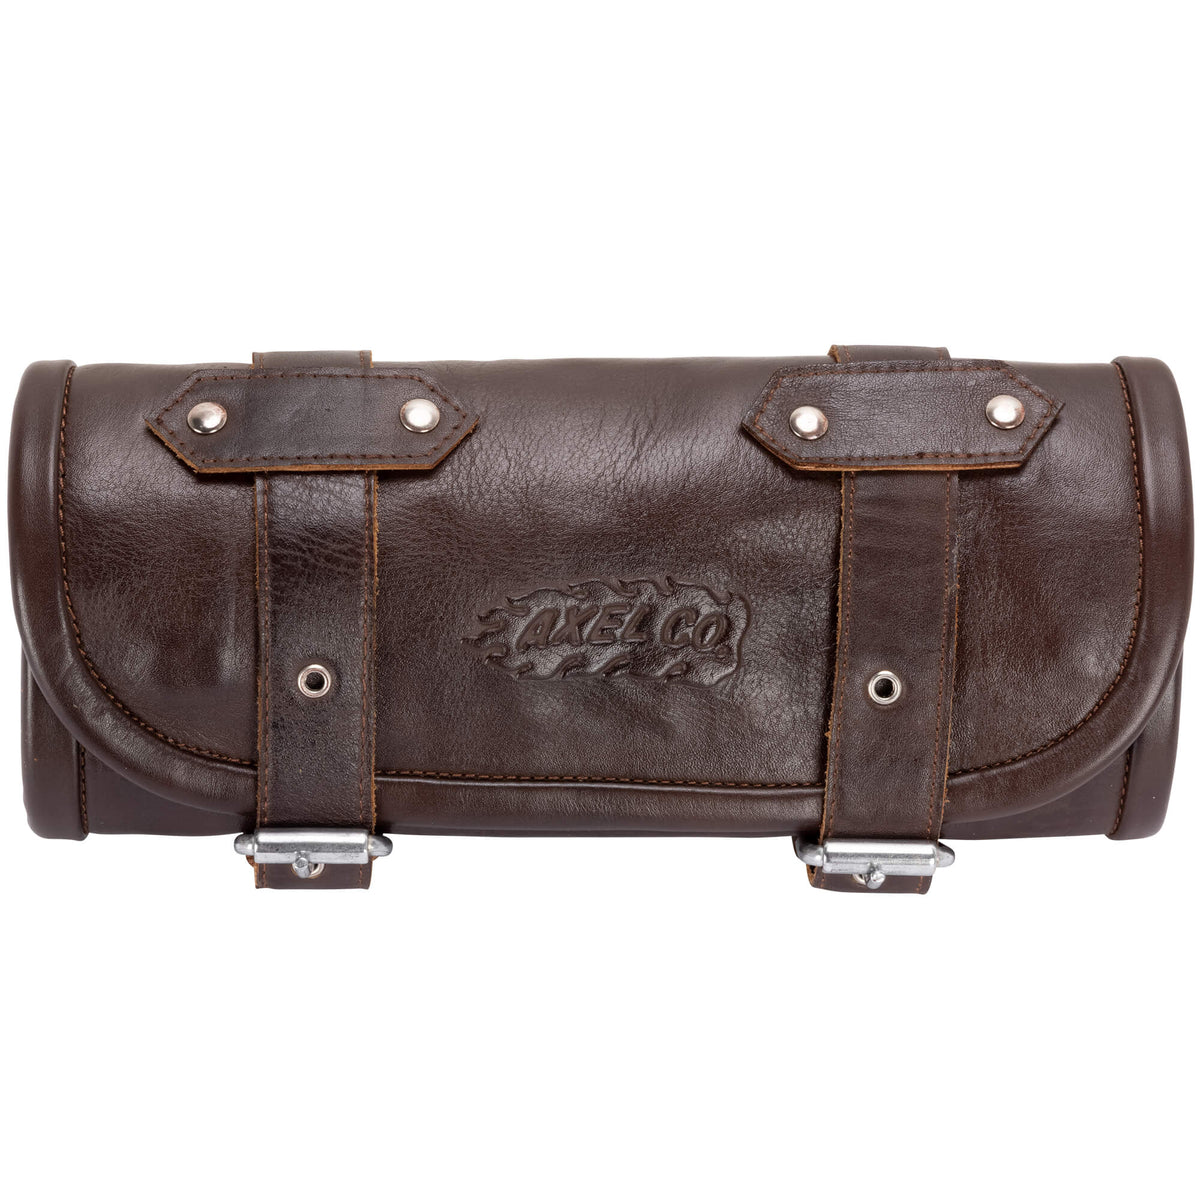 Leather Tool Roll for motorcycle tools in Chocolate Brown – QCUSTOMS